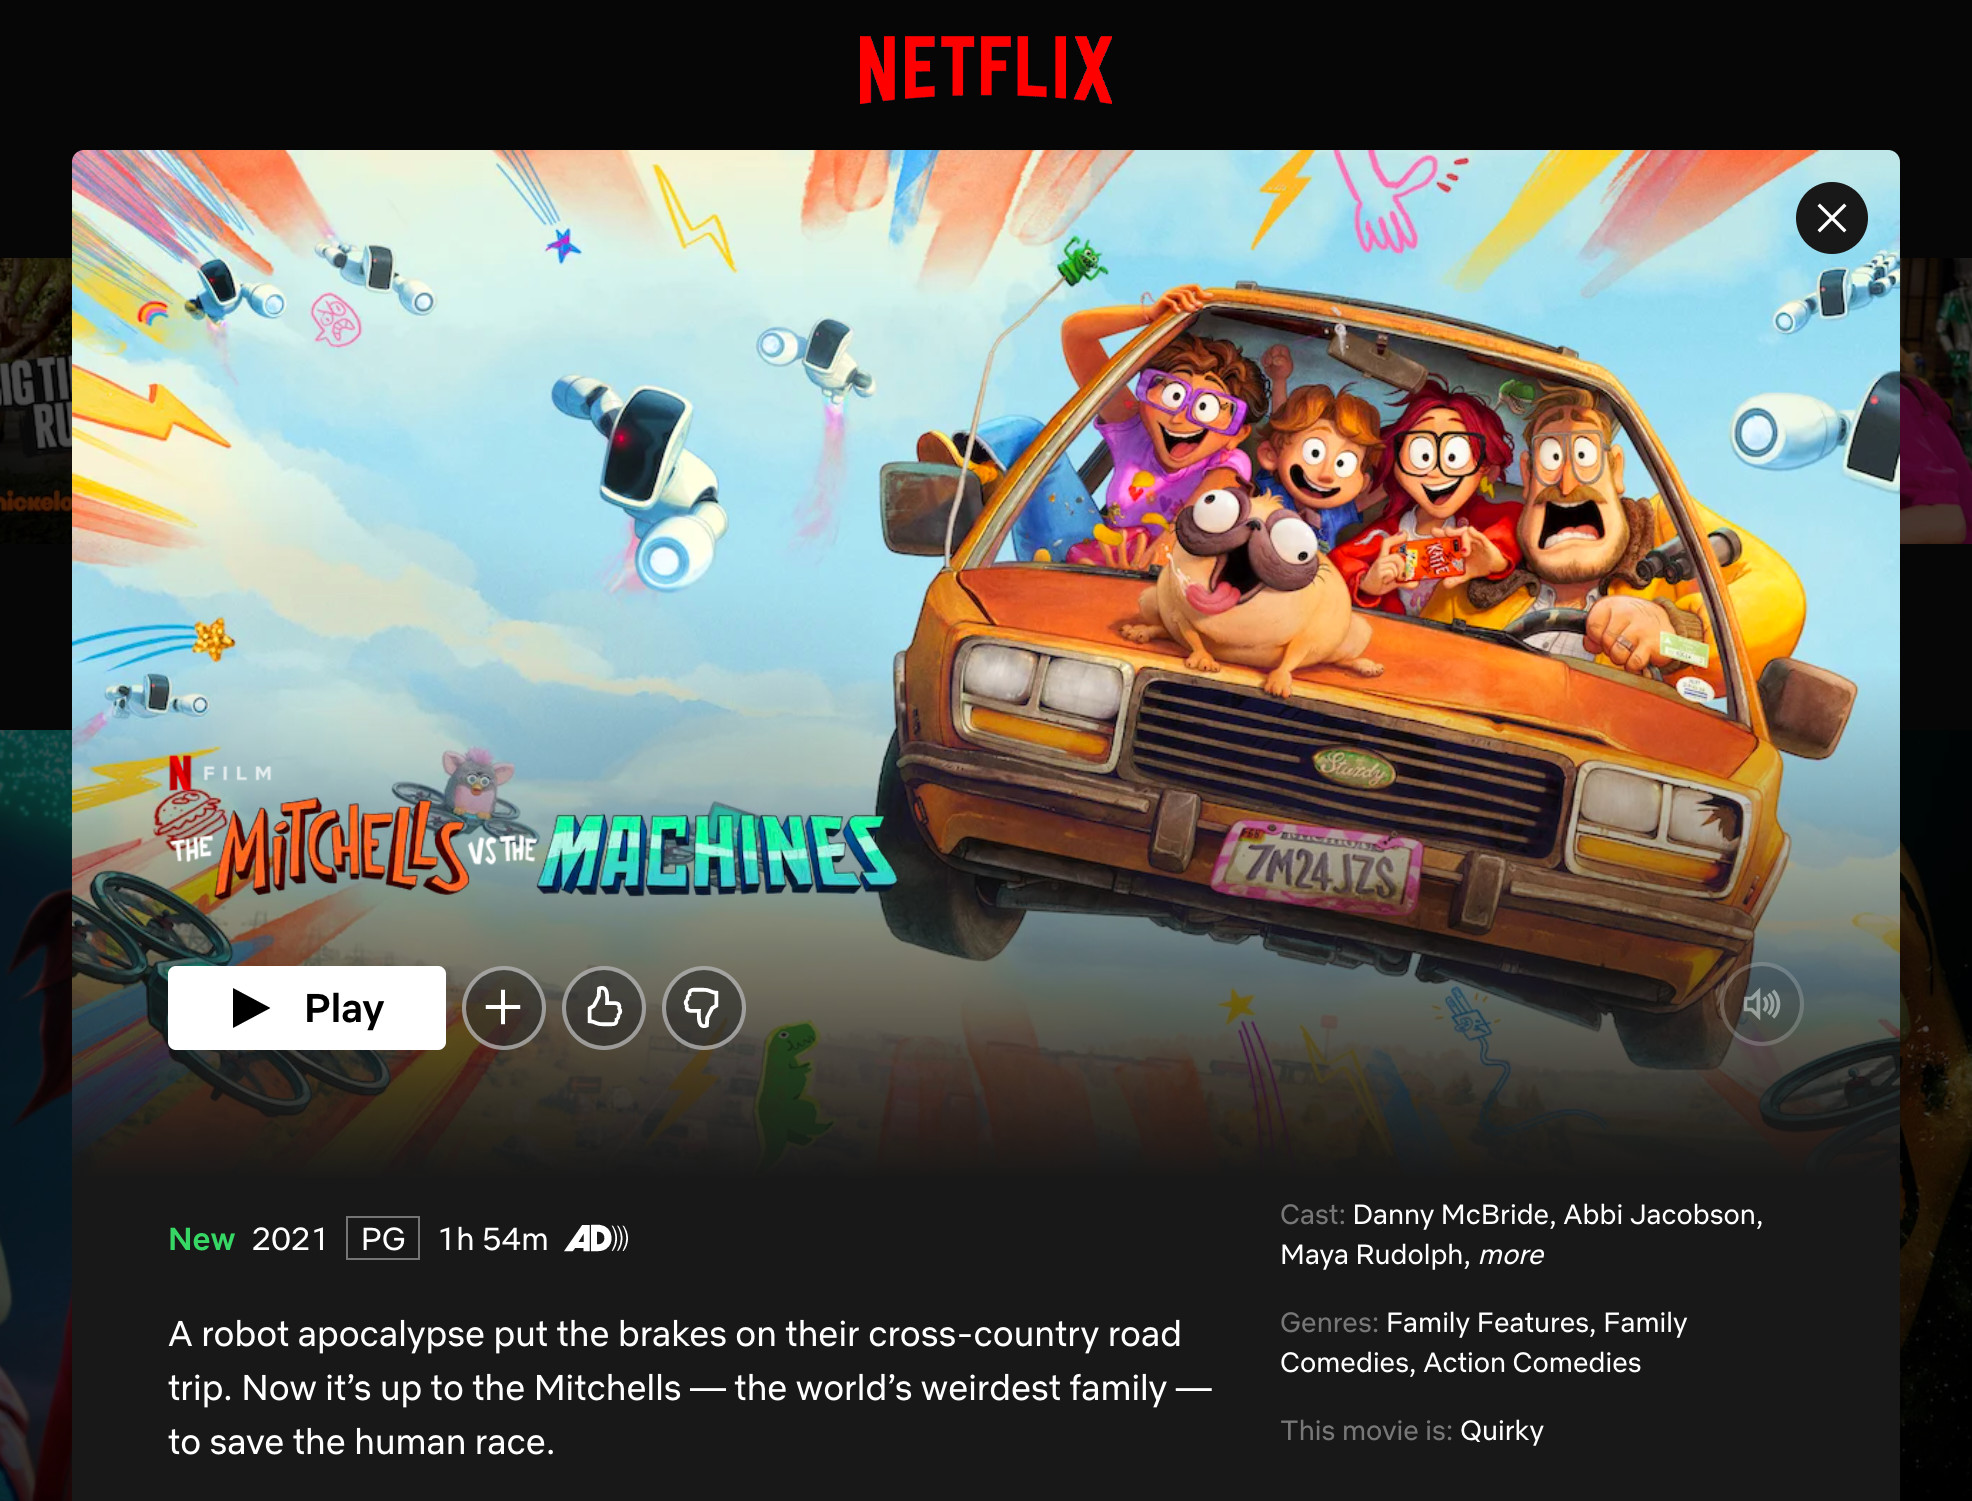 Home Page of Netflix